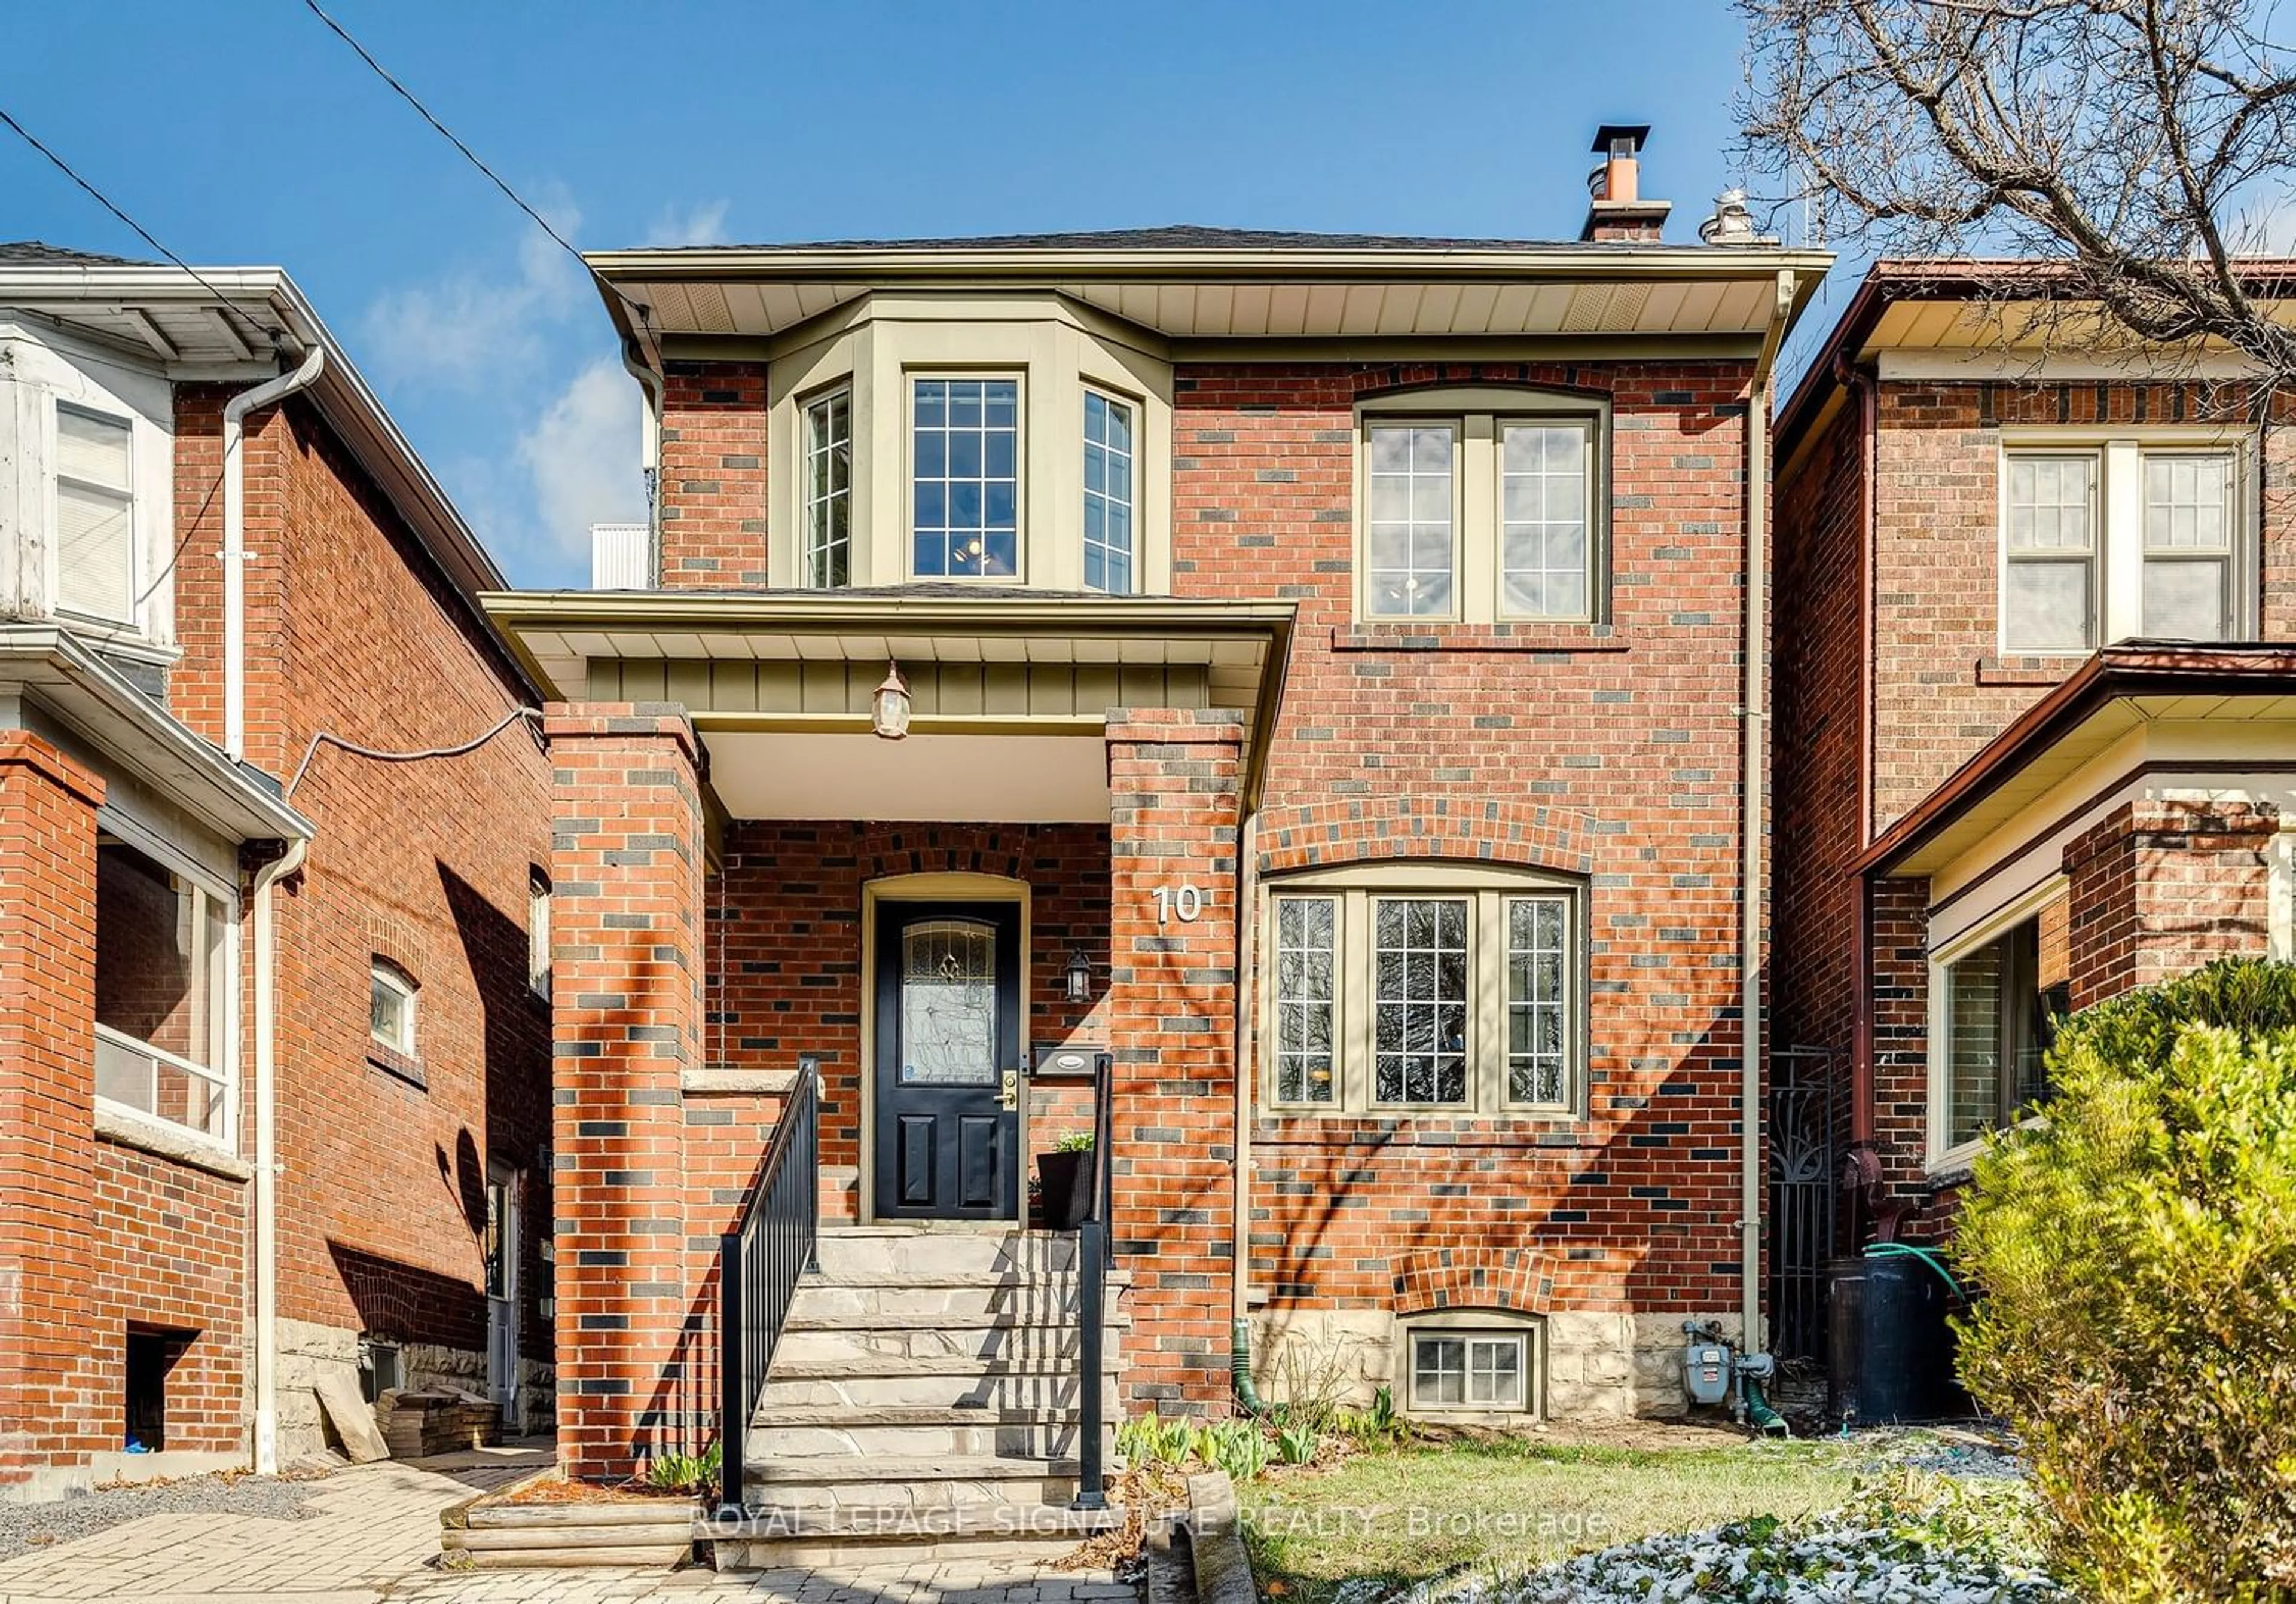 Home with brick exterior material for 10 Larkin Ave, Toronto Ontario M6S 1L8